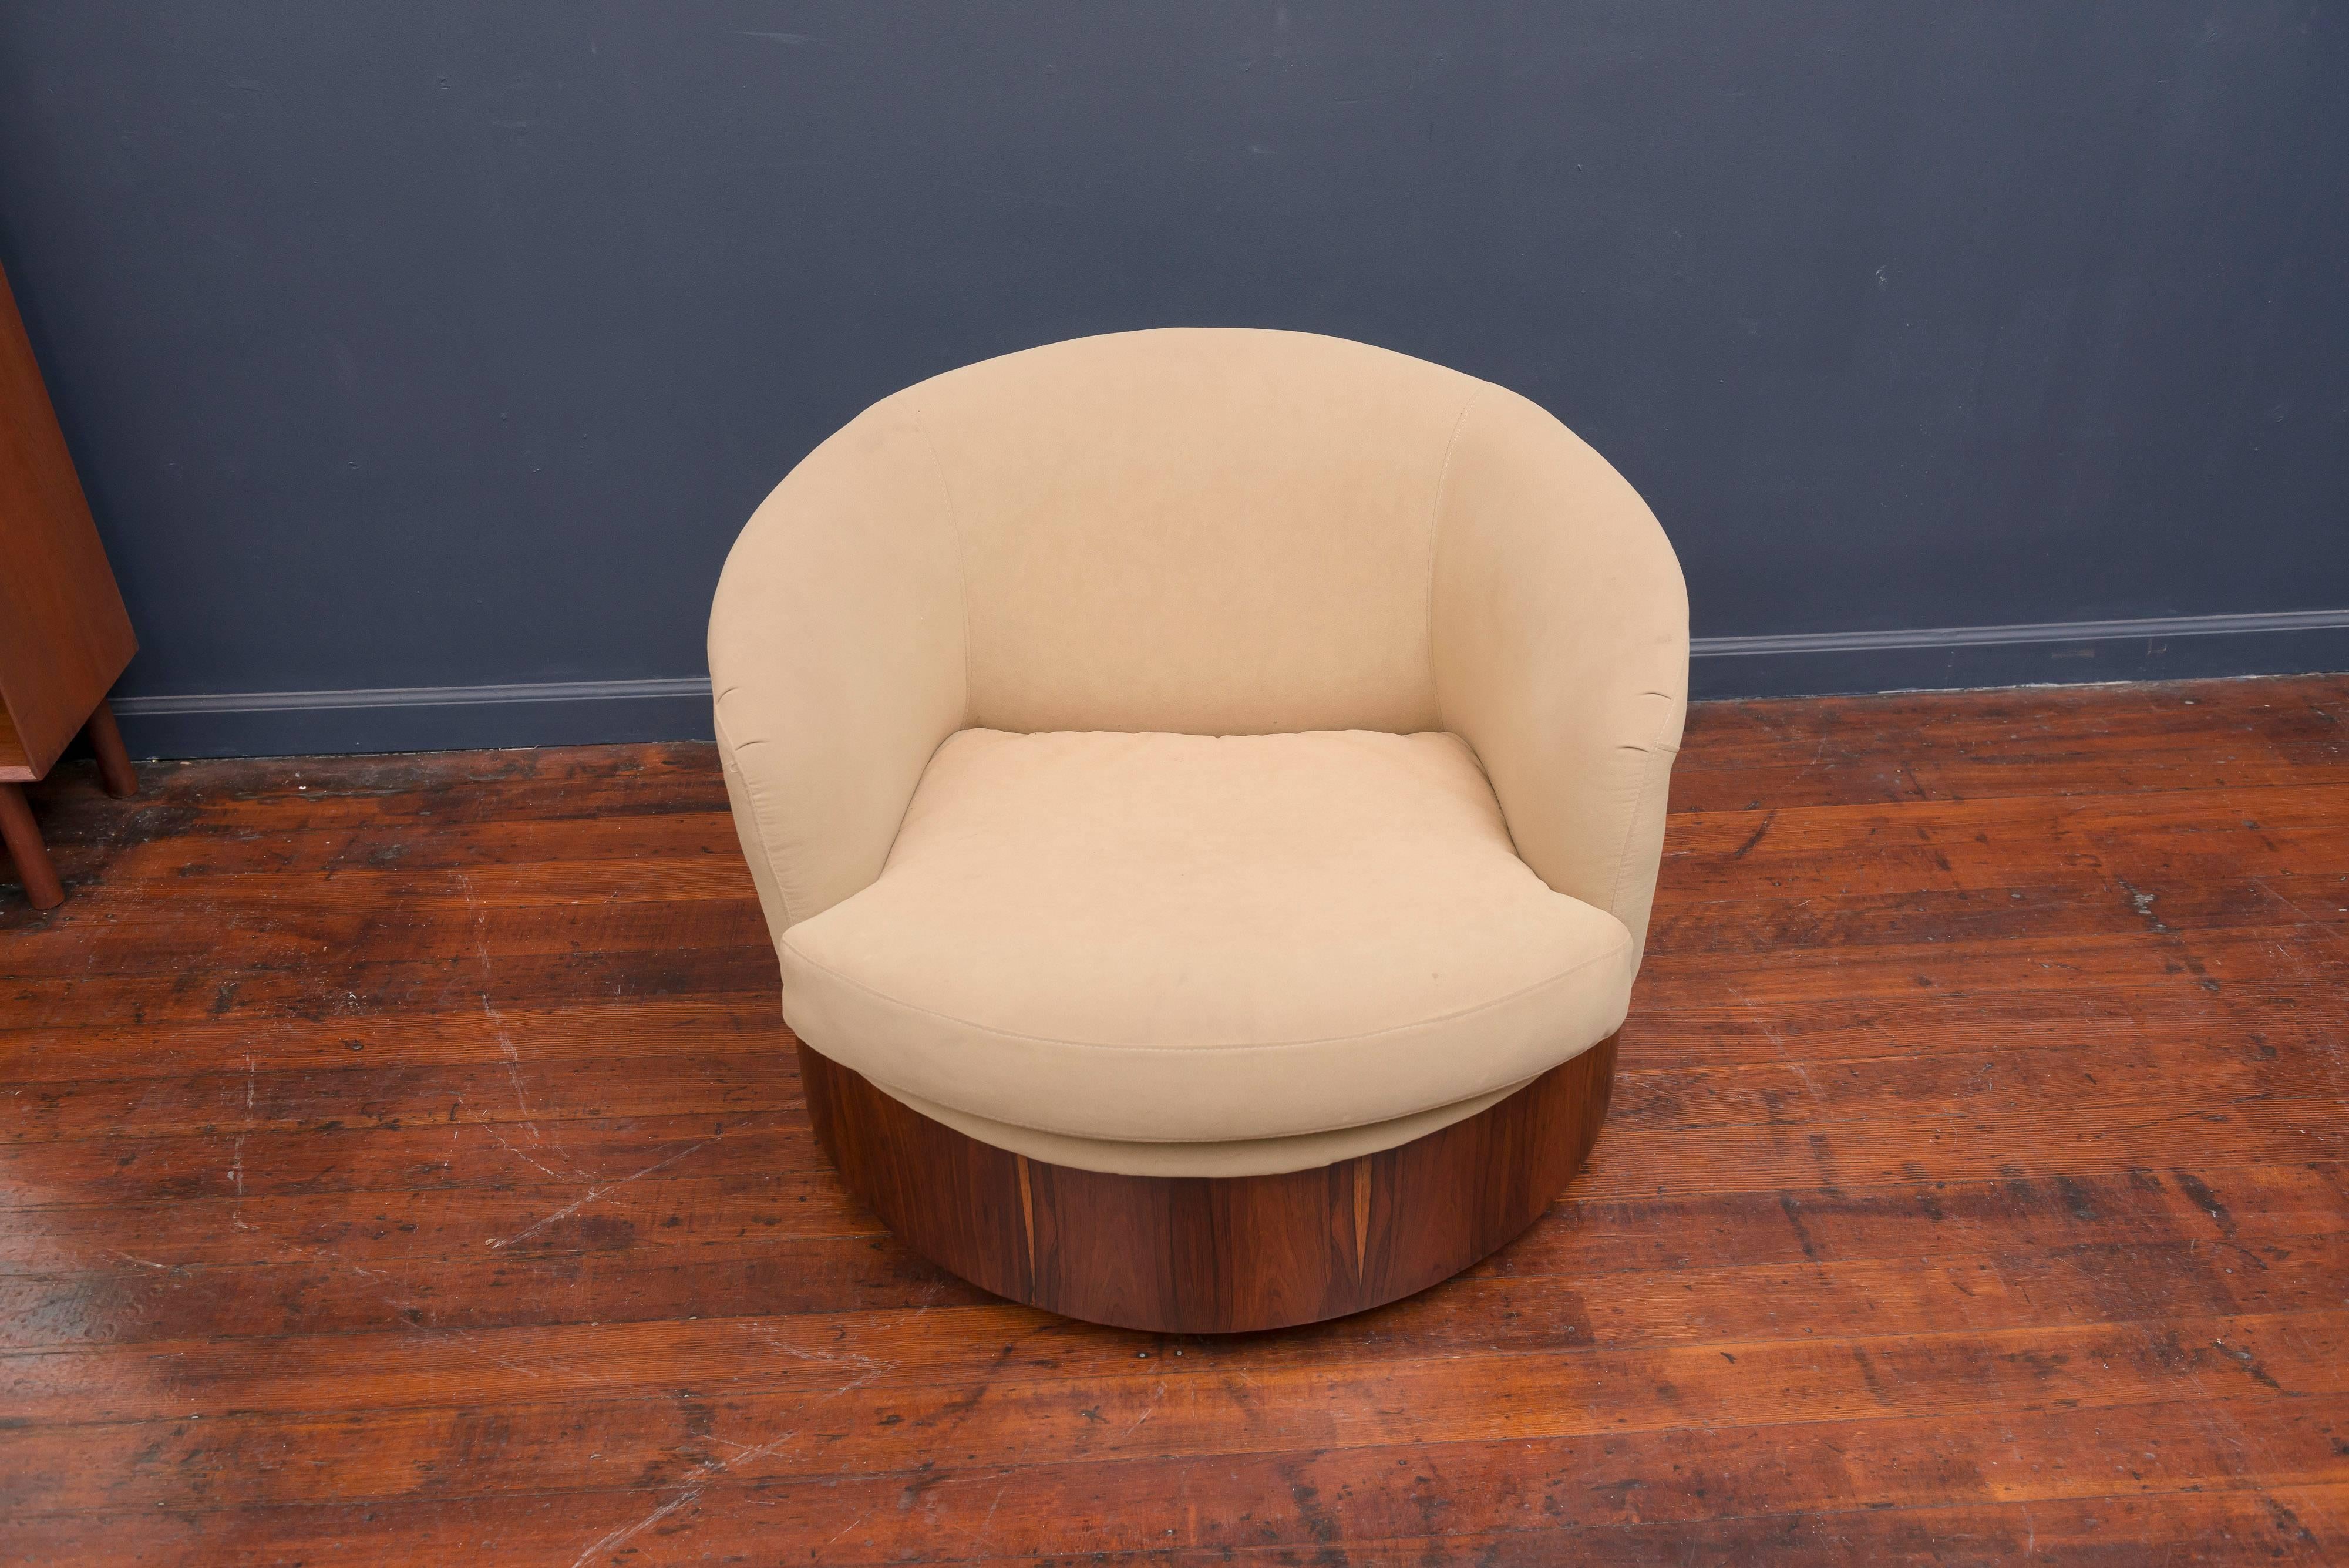 Rare form rosewood veneer swivel lounge chair designed by George Mulhauser for Plycraft. Newly refinished and ready to upholster or use as-is, very comfy.